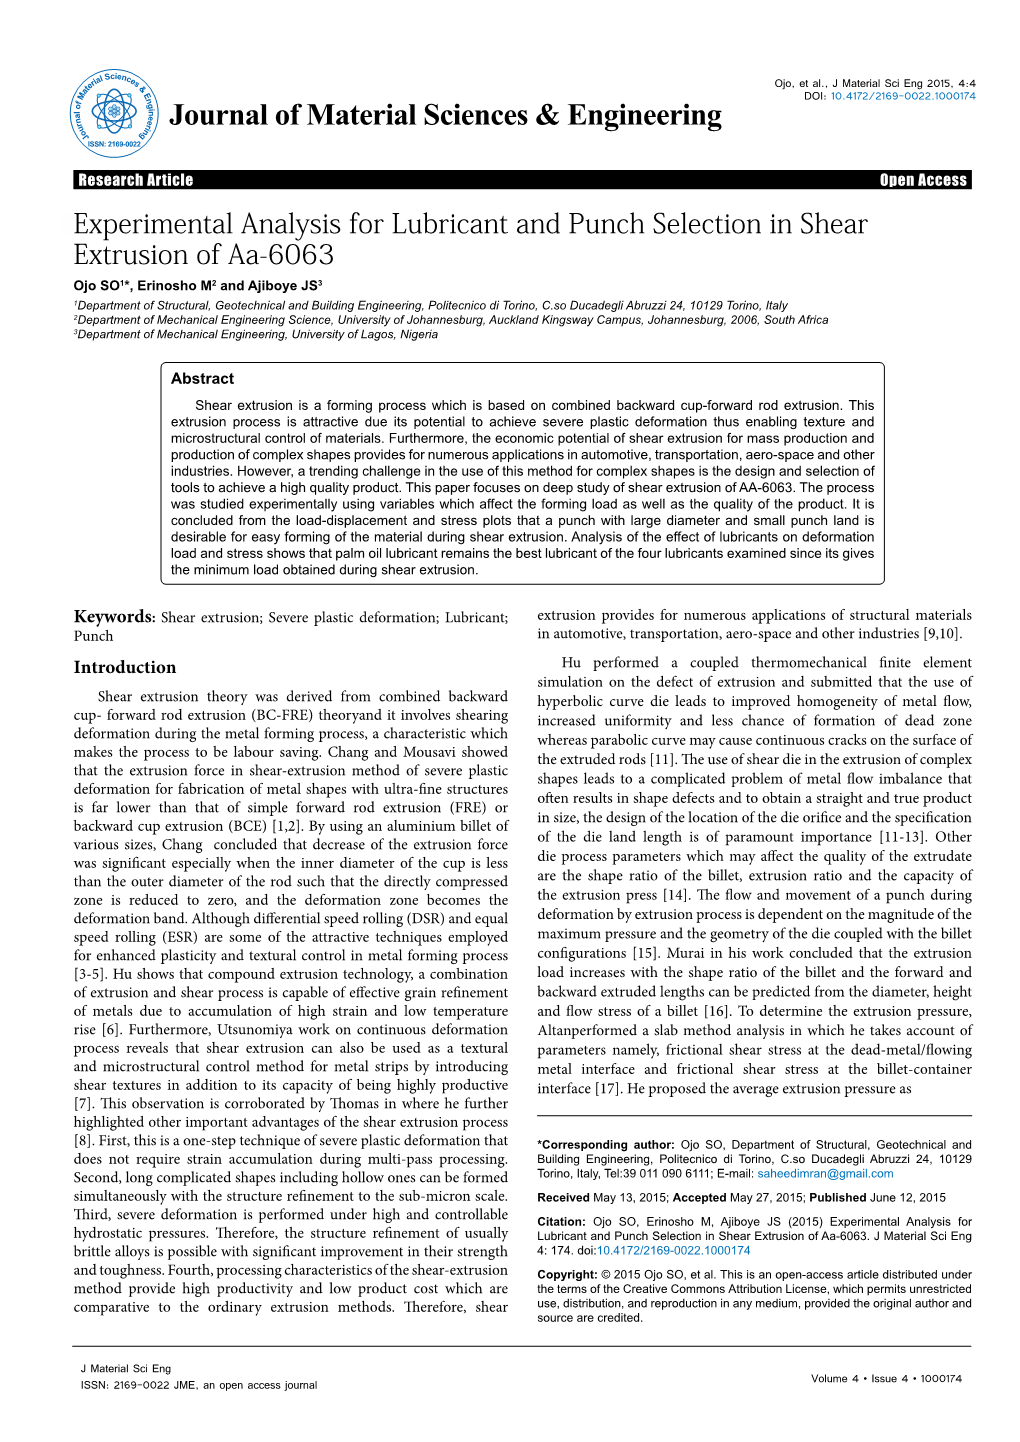 Experimental Analysis for Lubricant and Punch Selection in Shear